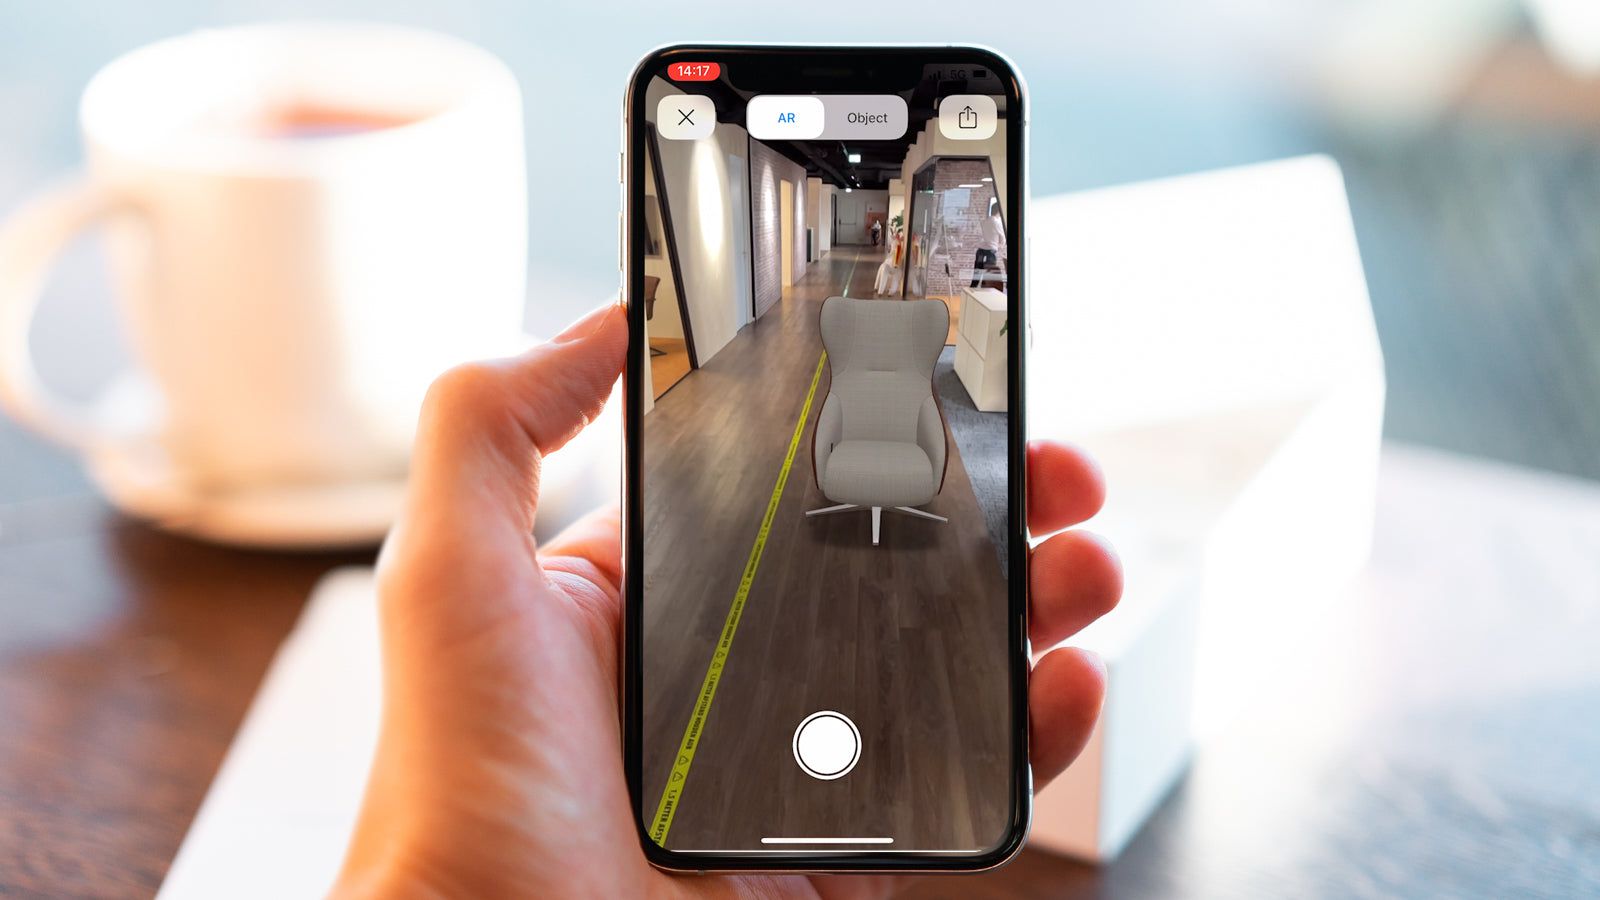 3D Configurator with Augmented Reality AR for unique experience